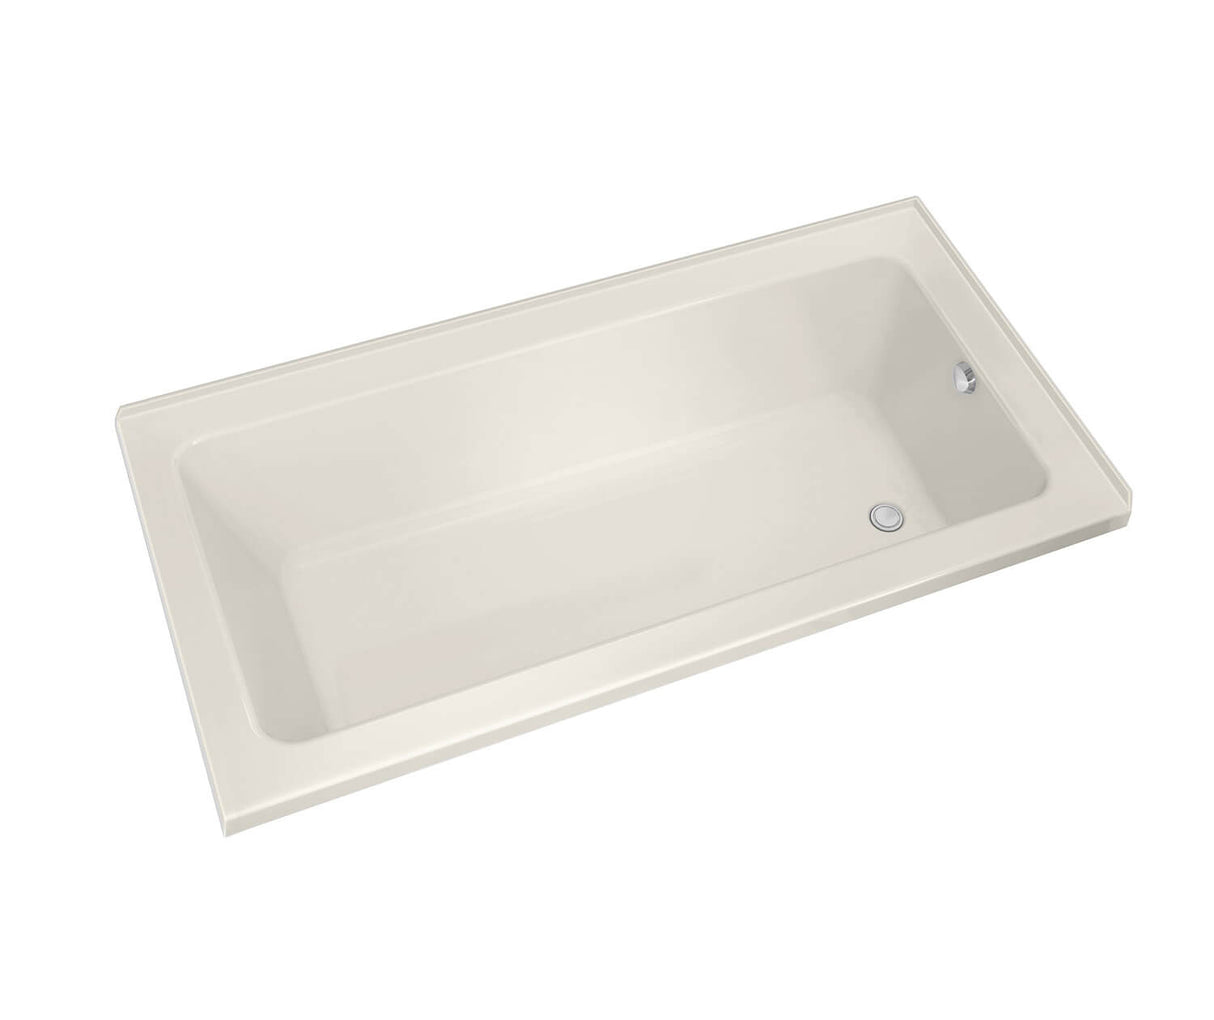 MAAX 106212-R-097-007 Pose 7236 IF Acrylic Corner Right Right-Hand Drain Combined Whirlpool & Aeroeffect Bathtub in Biscuit